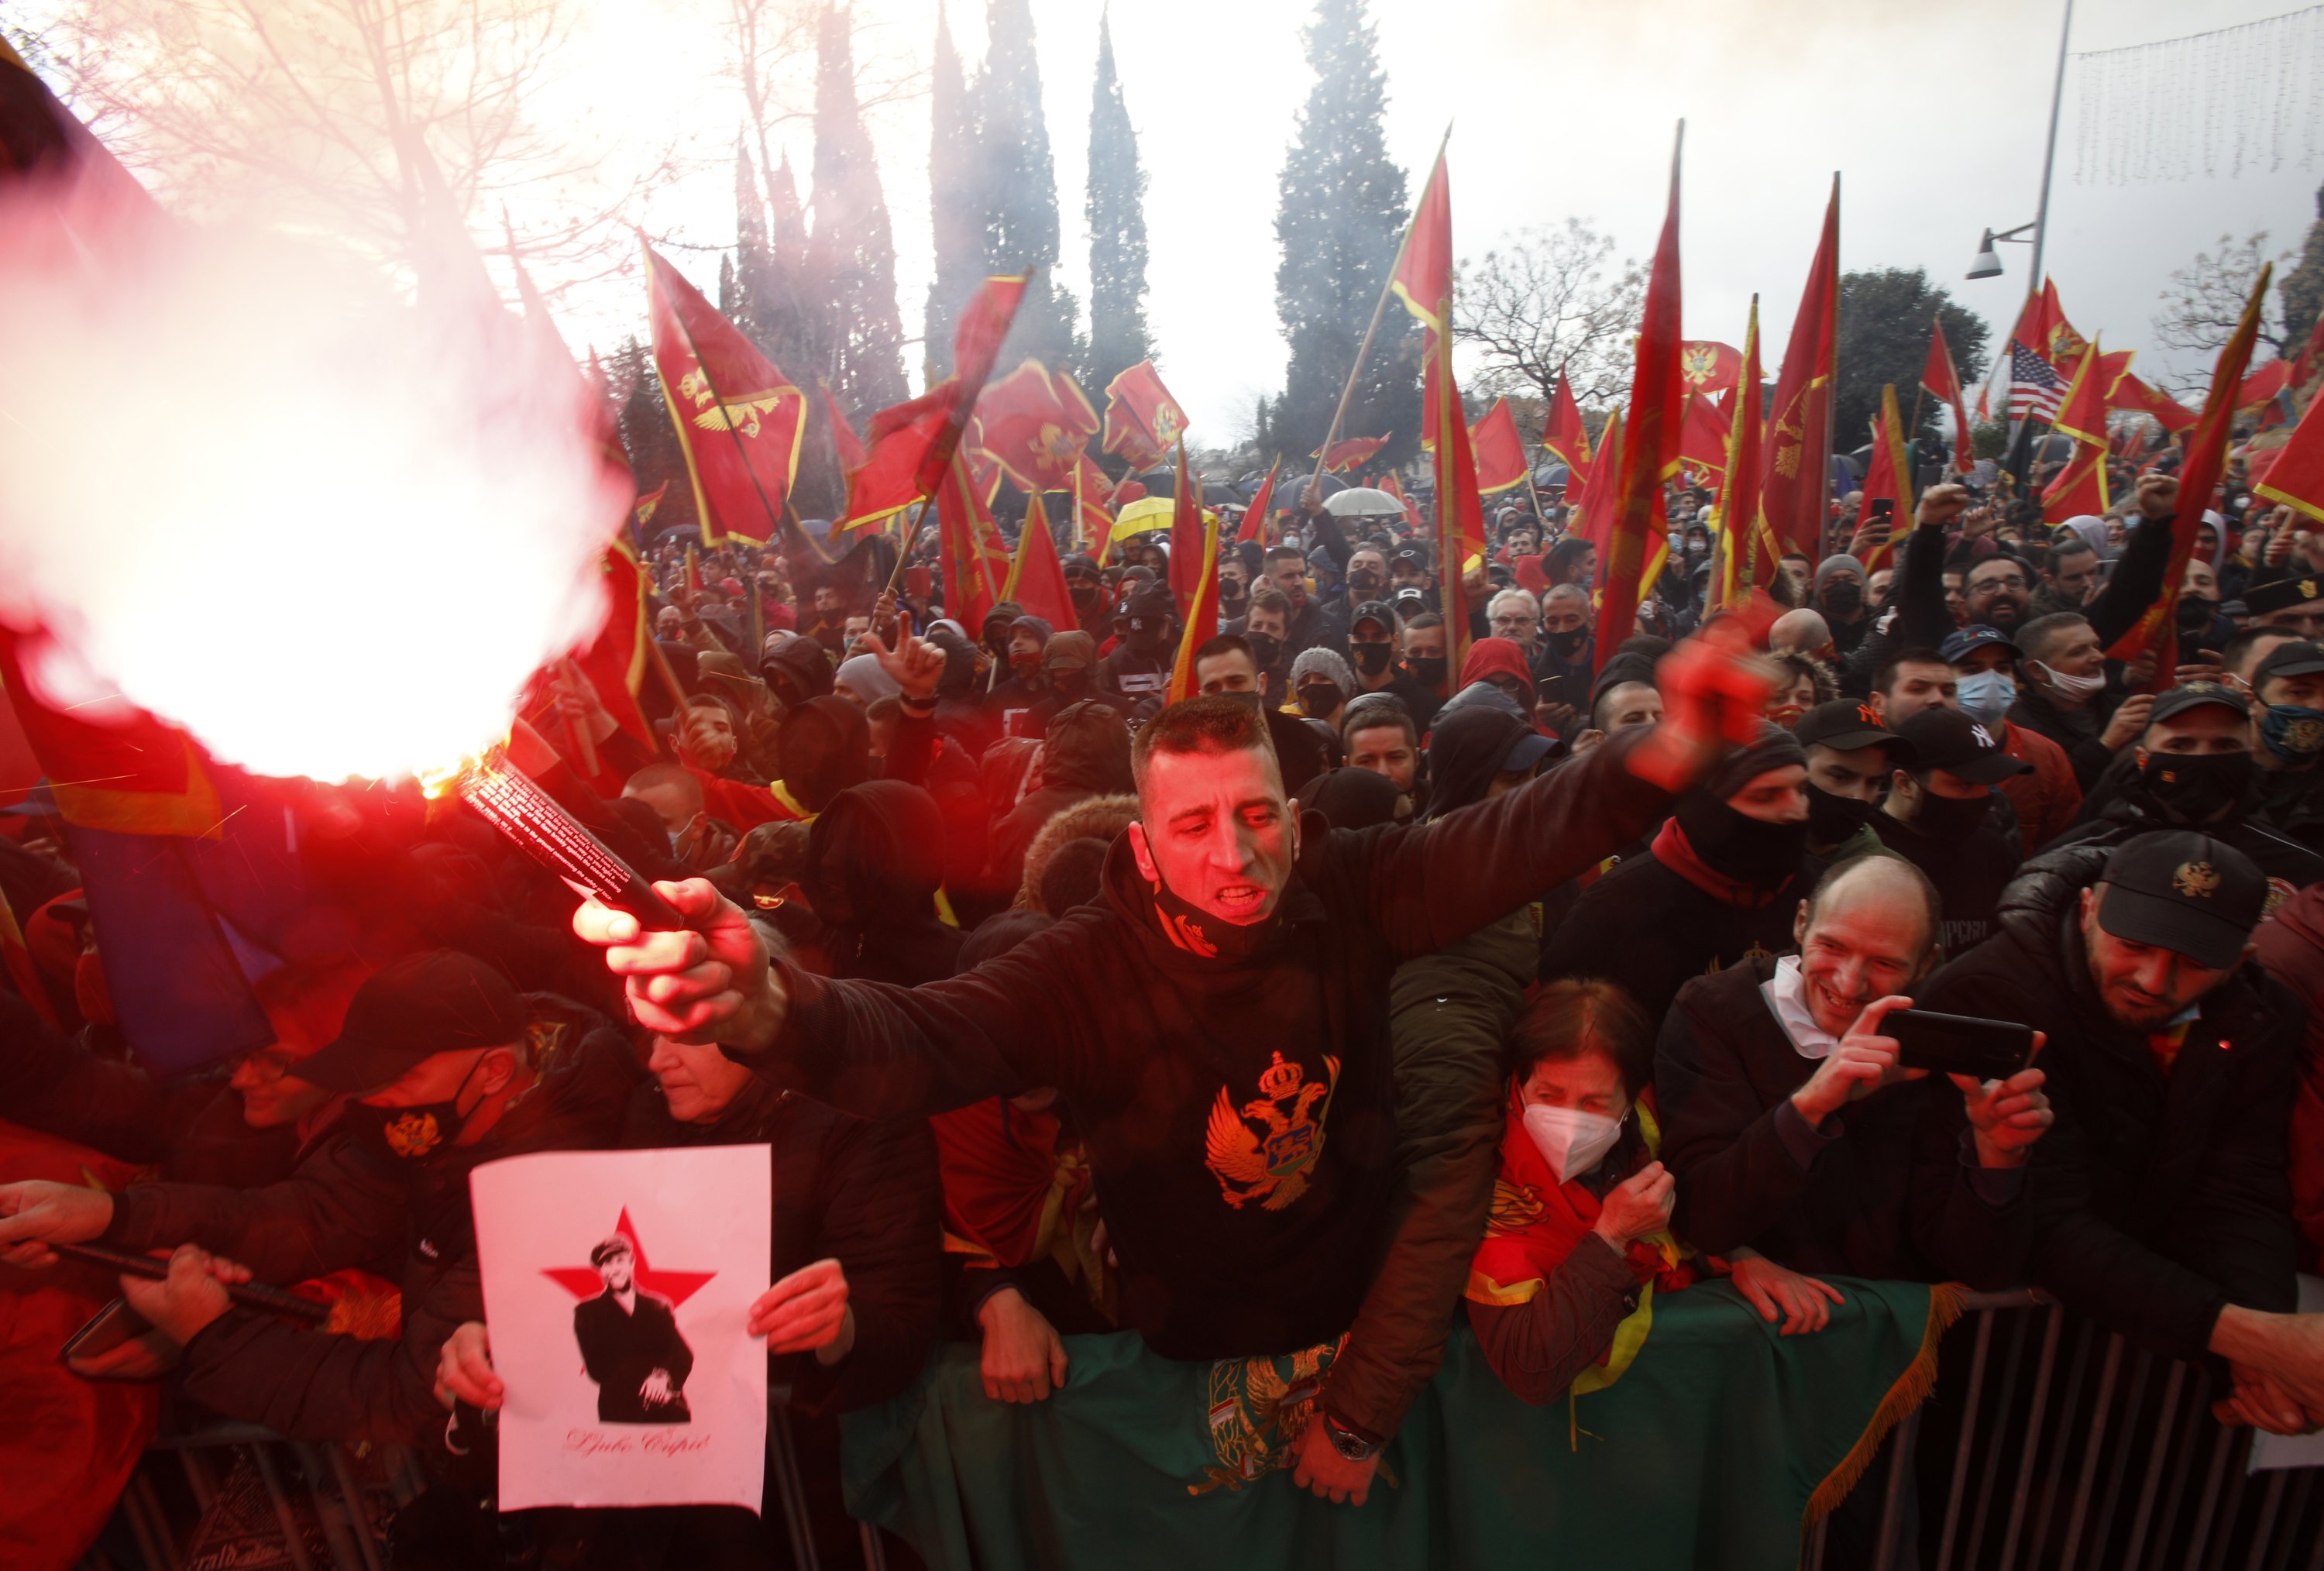 Protests arise against new Montenegro government over religious law